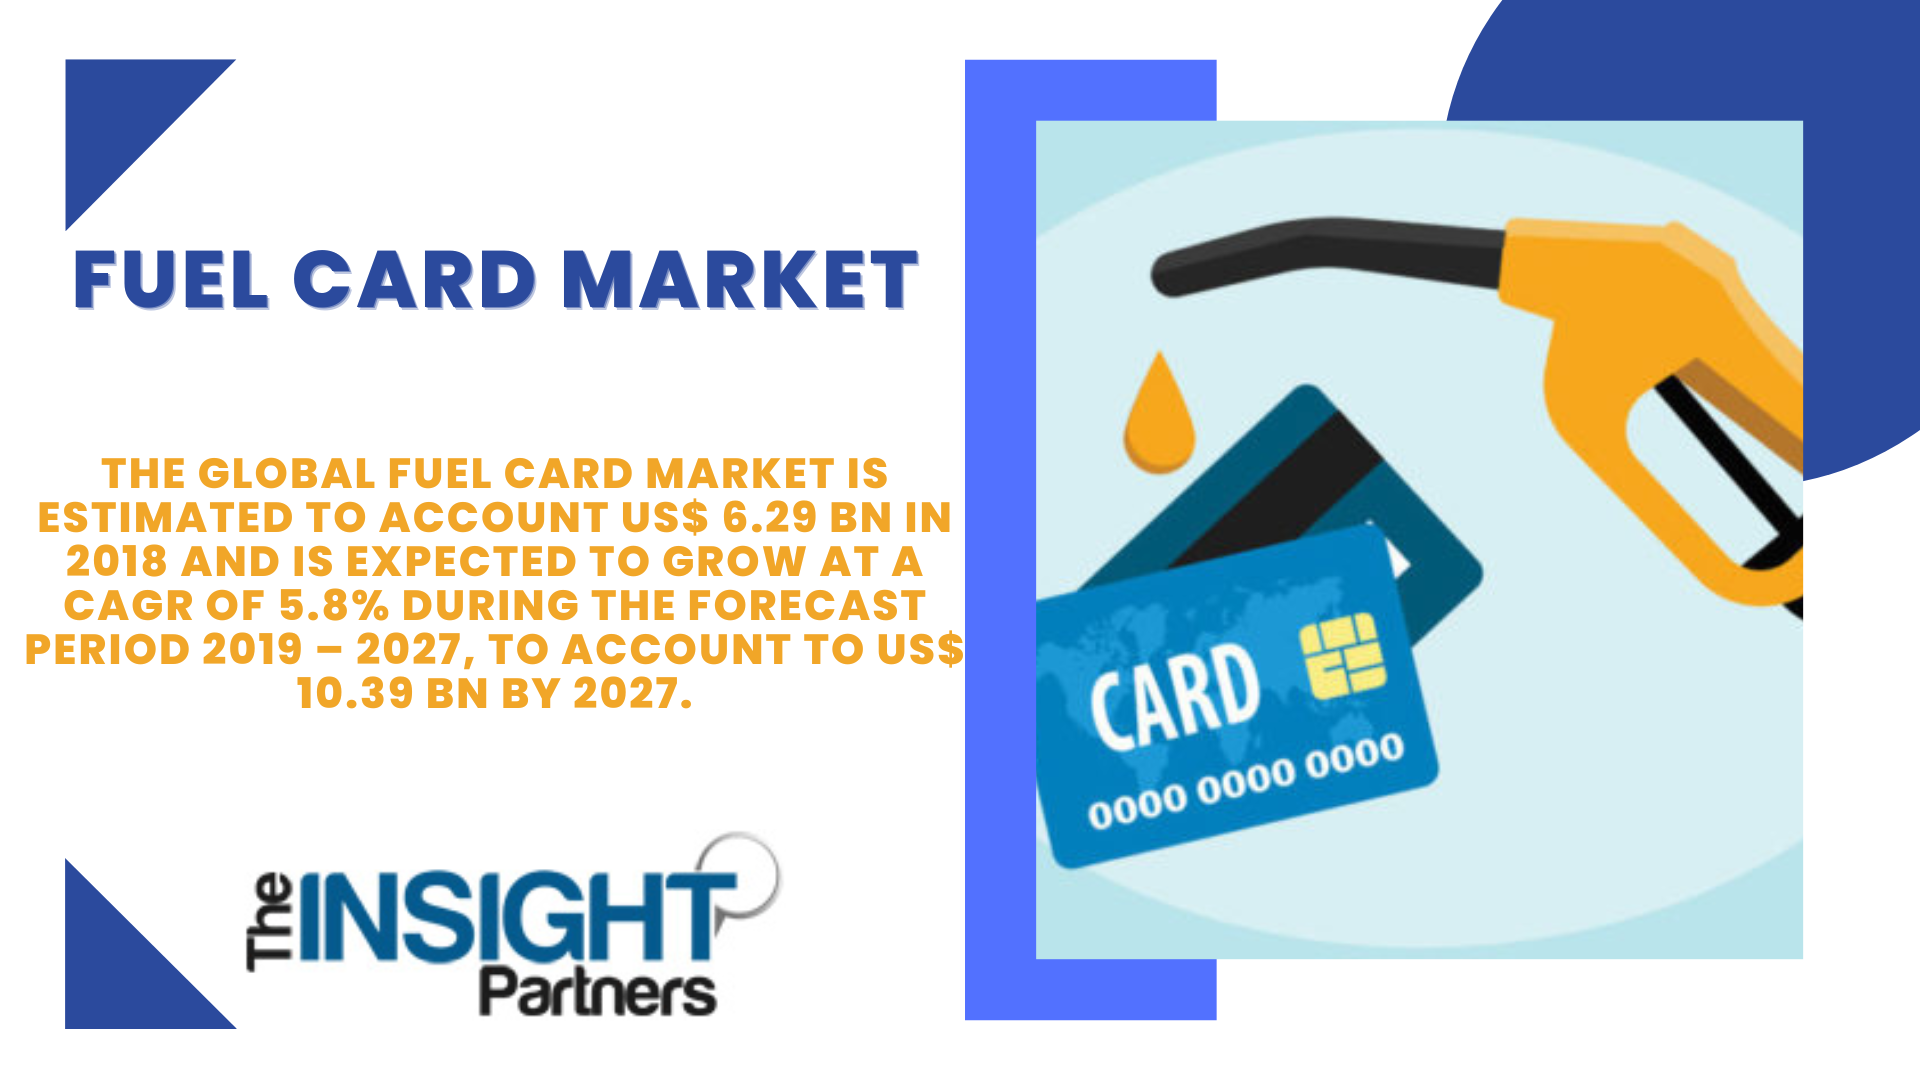 Fuel Card Market Attractiveness, Competitive Landscape and Key Players